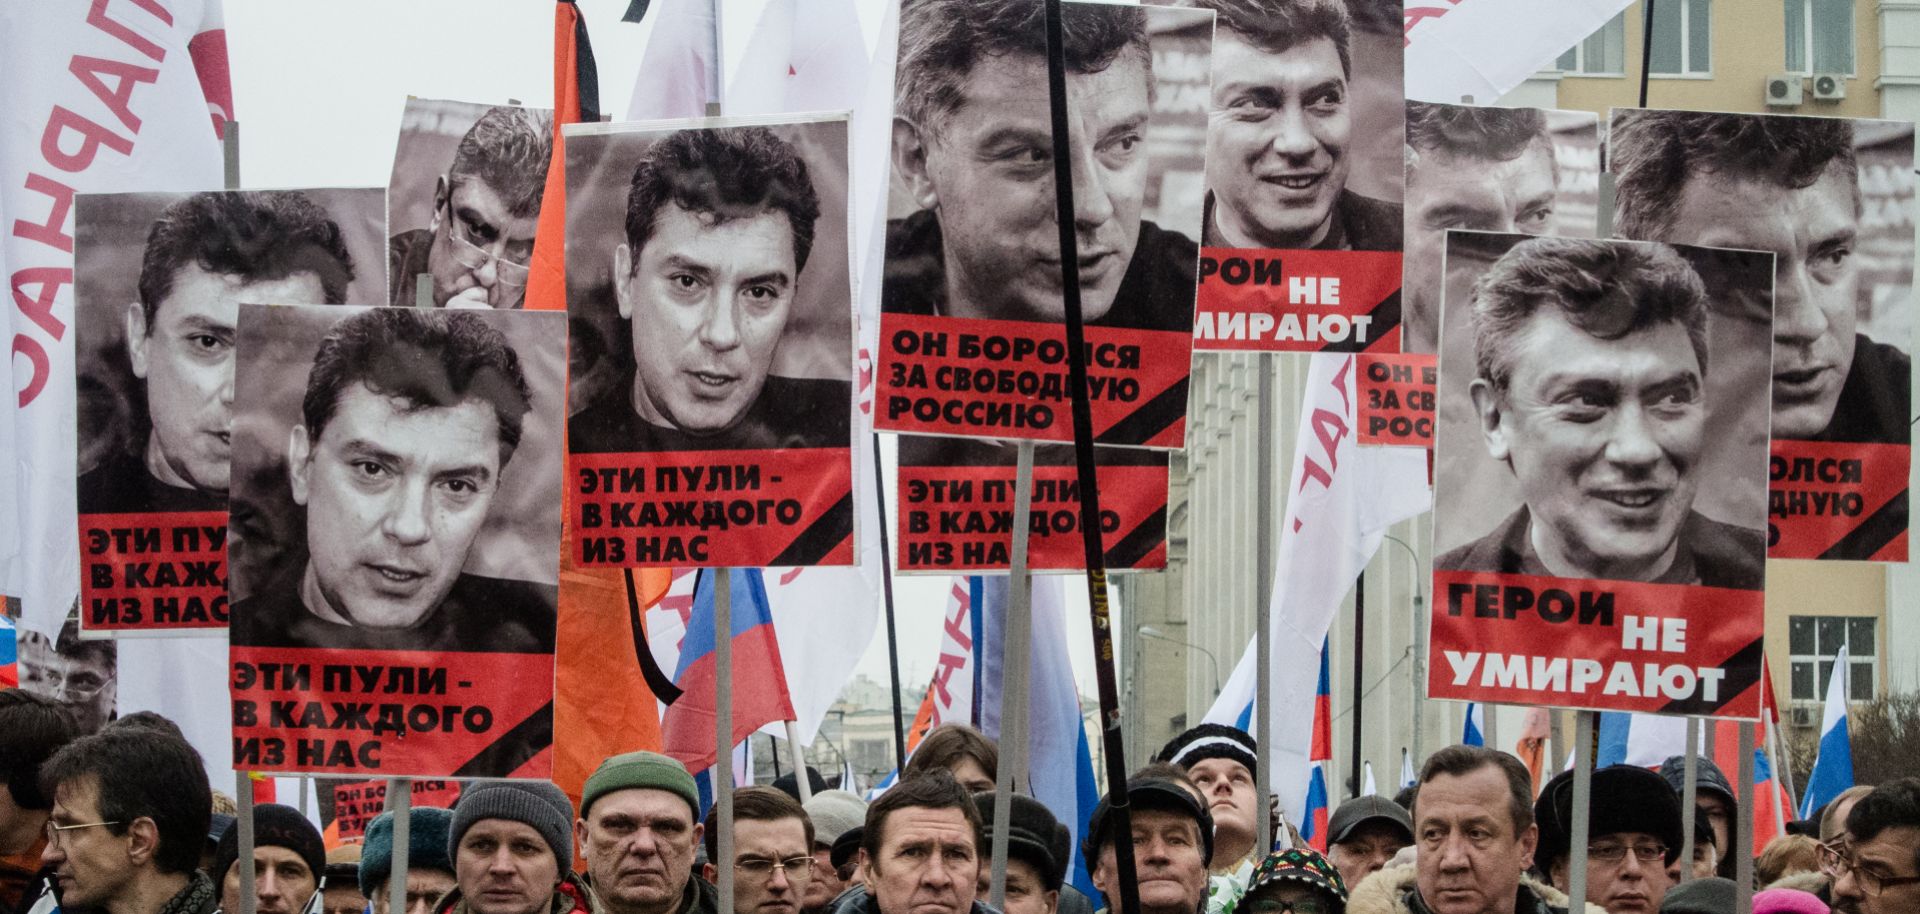 People march in memory of Russian opposition leader and former Deputy Prime Minister Boris Nemtsov on March 1, 2015, in central Moscow.